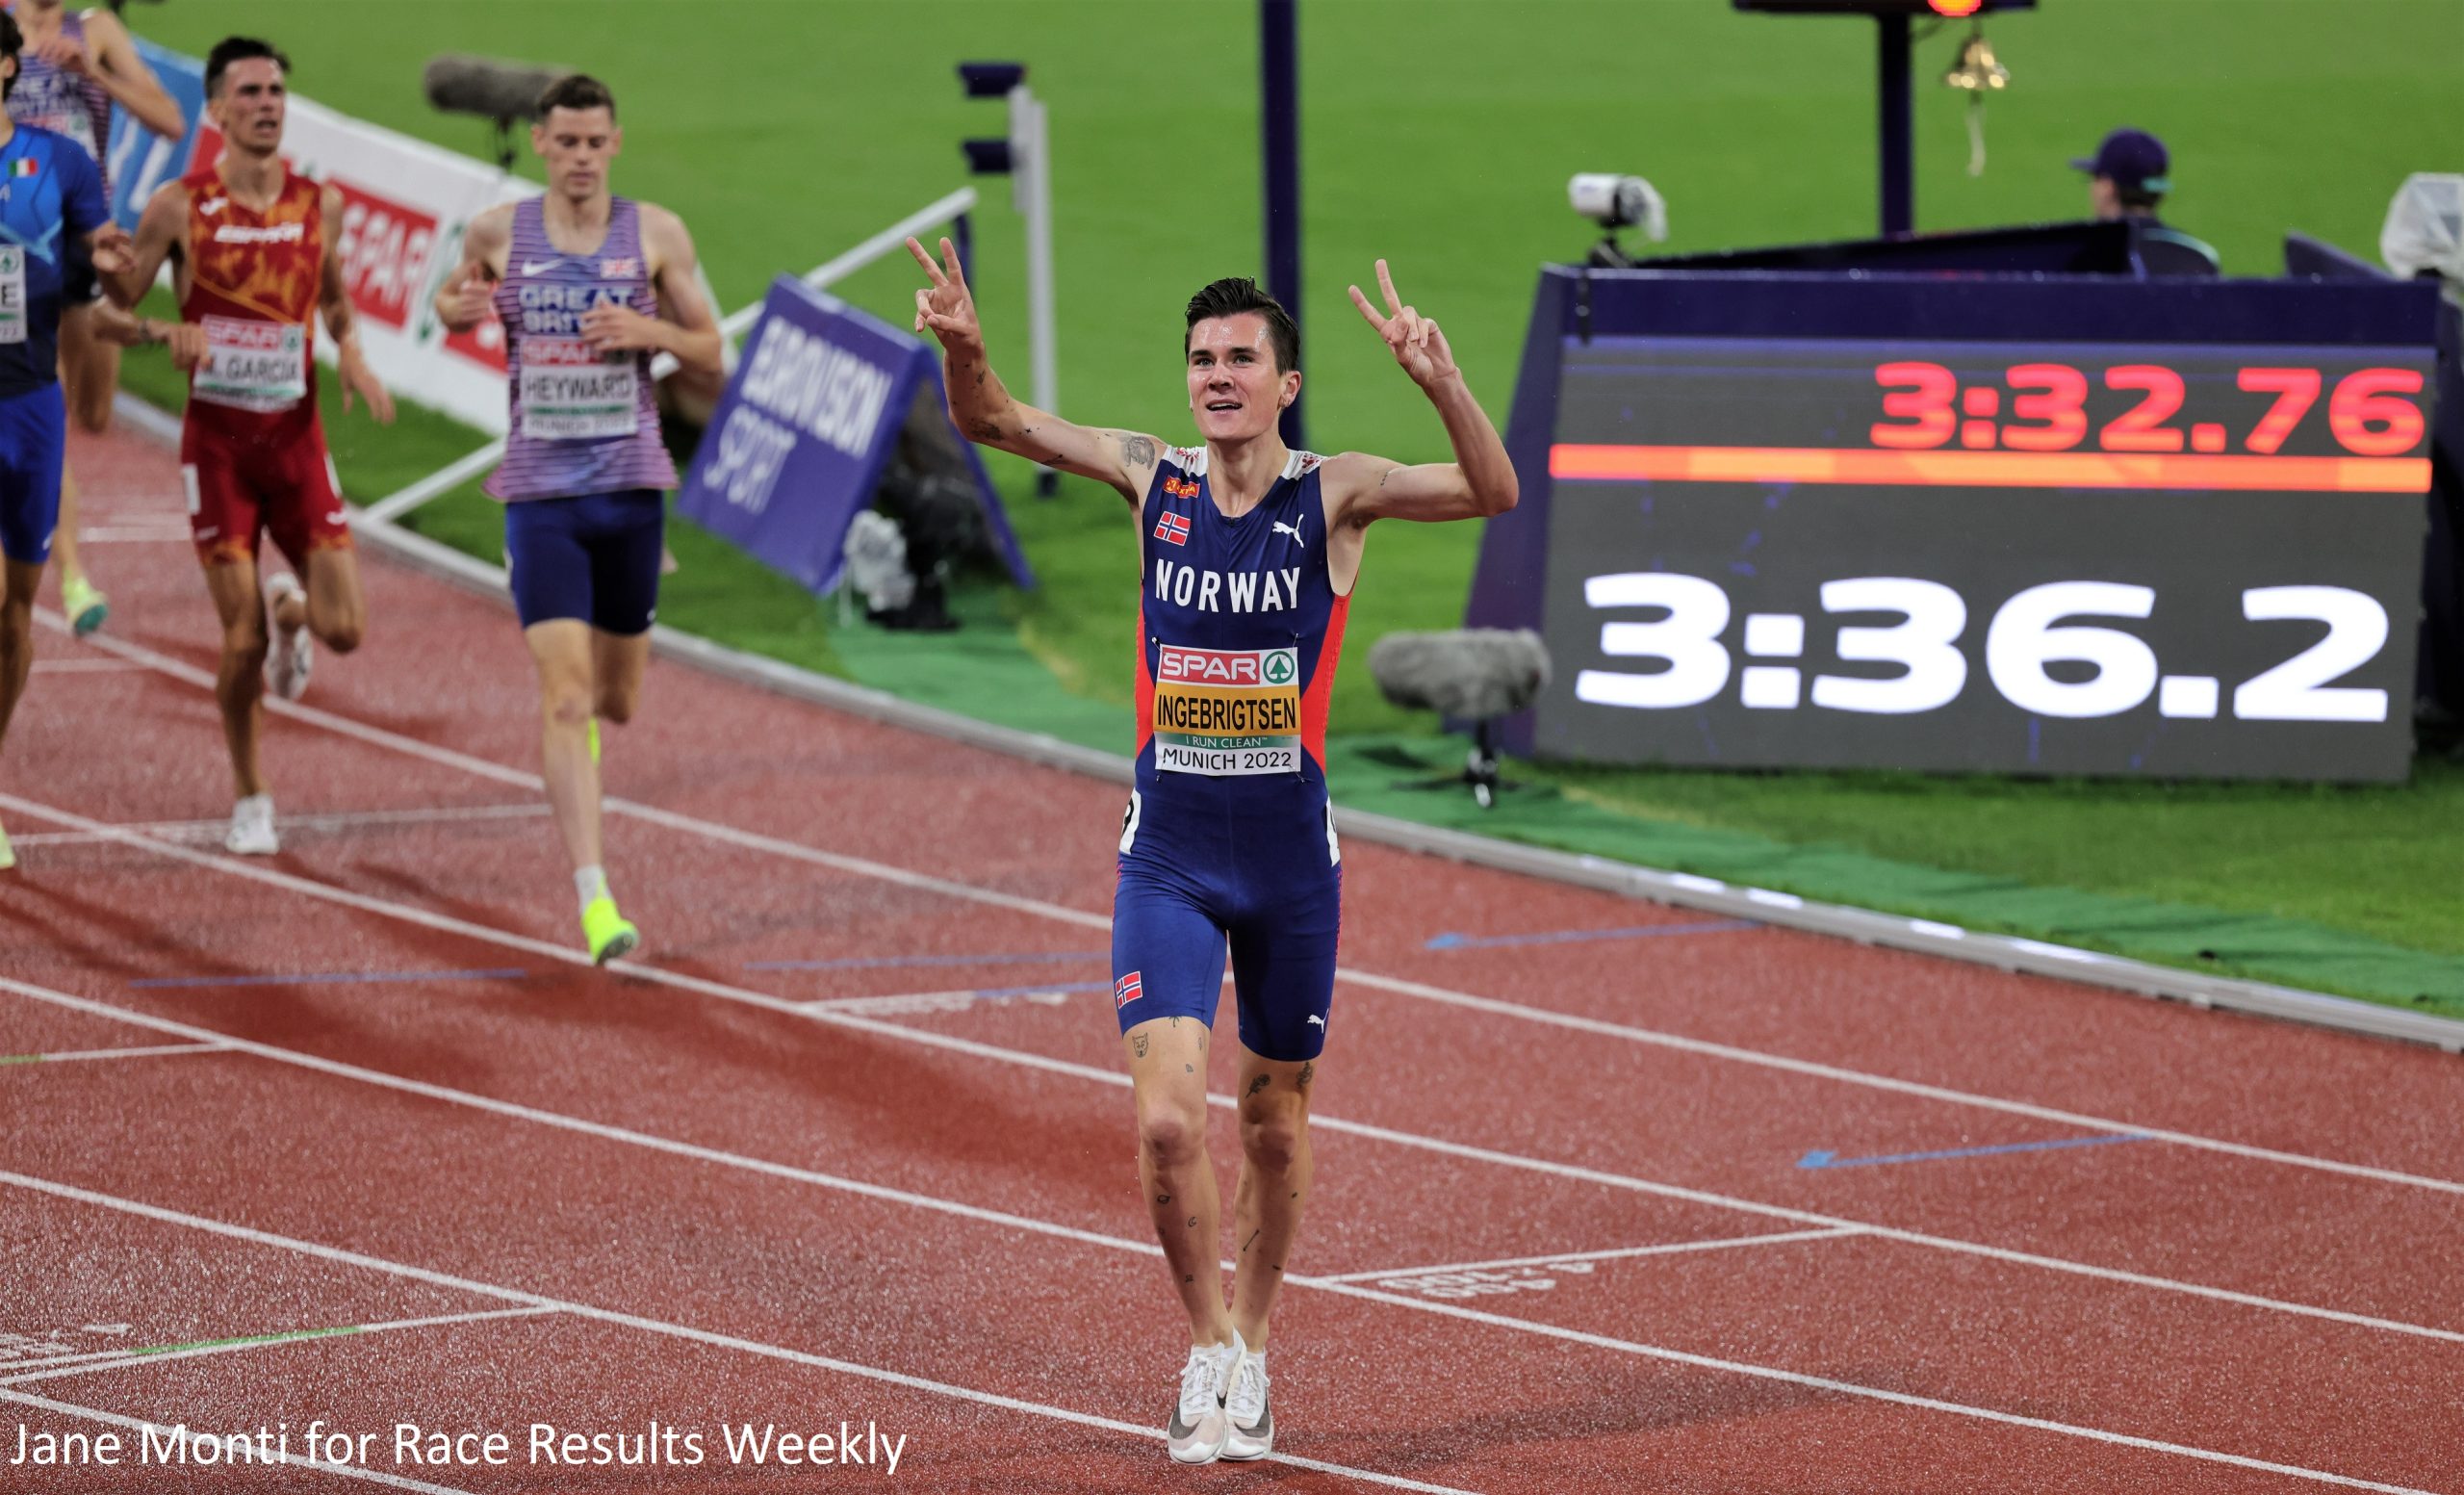 Jakob Ingebrigtsen winning the 1500m title at the 2022 European Athletics Championships in Münich (photo by Jane Monti for Race Results Weekly)